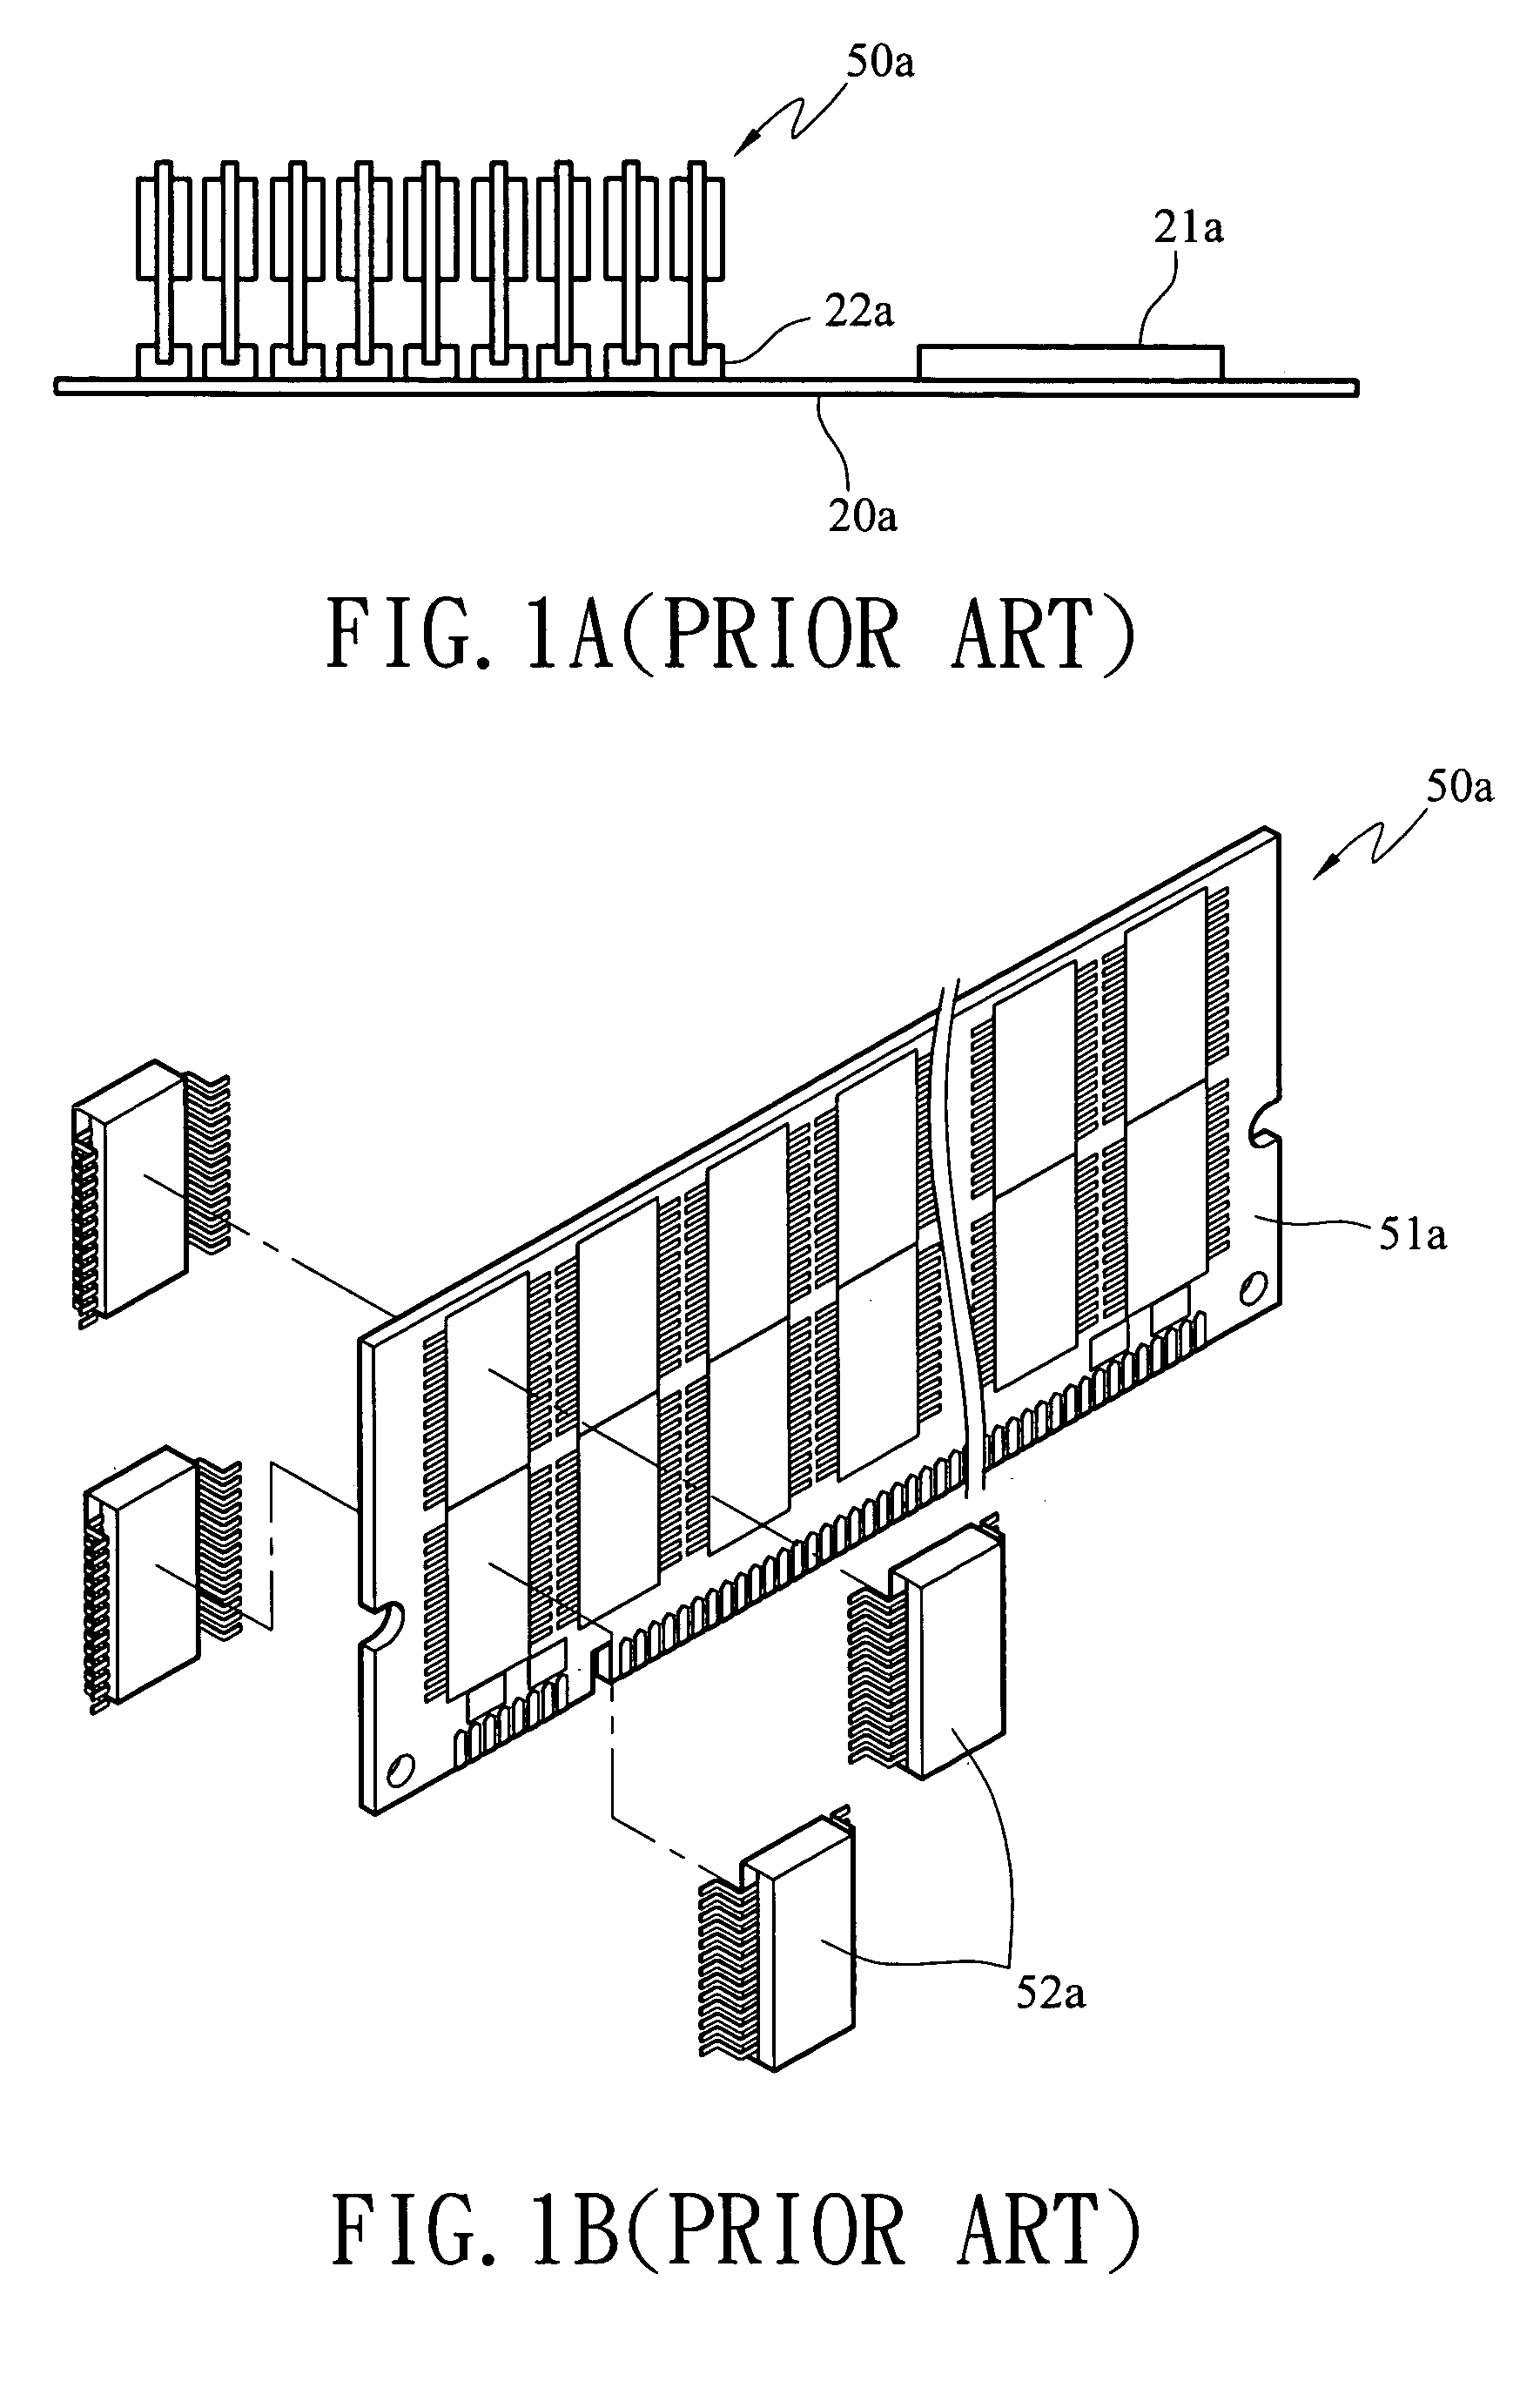 Expansion structure of memory module slot